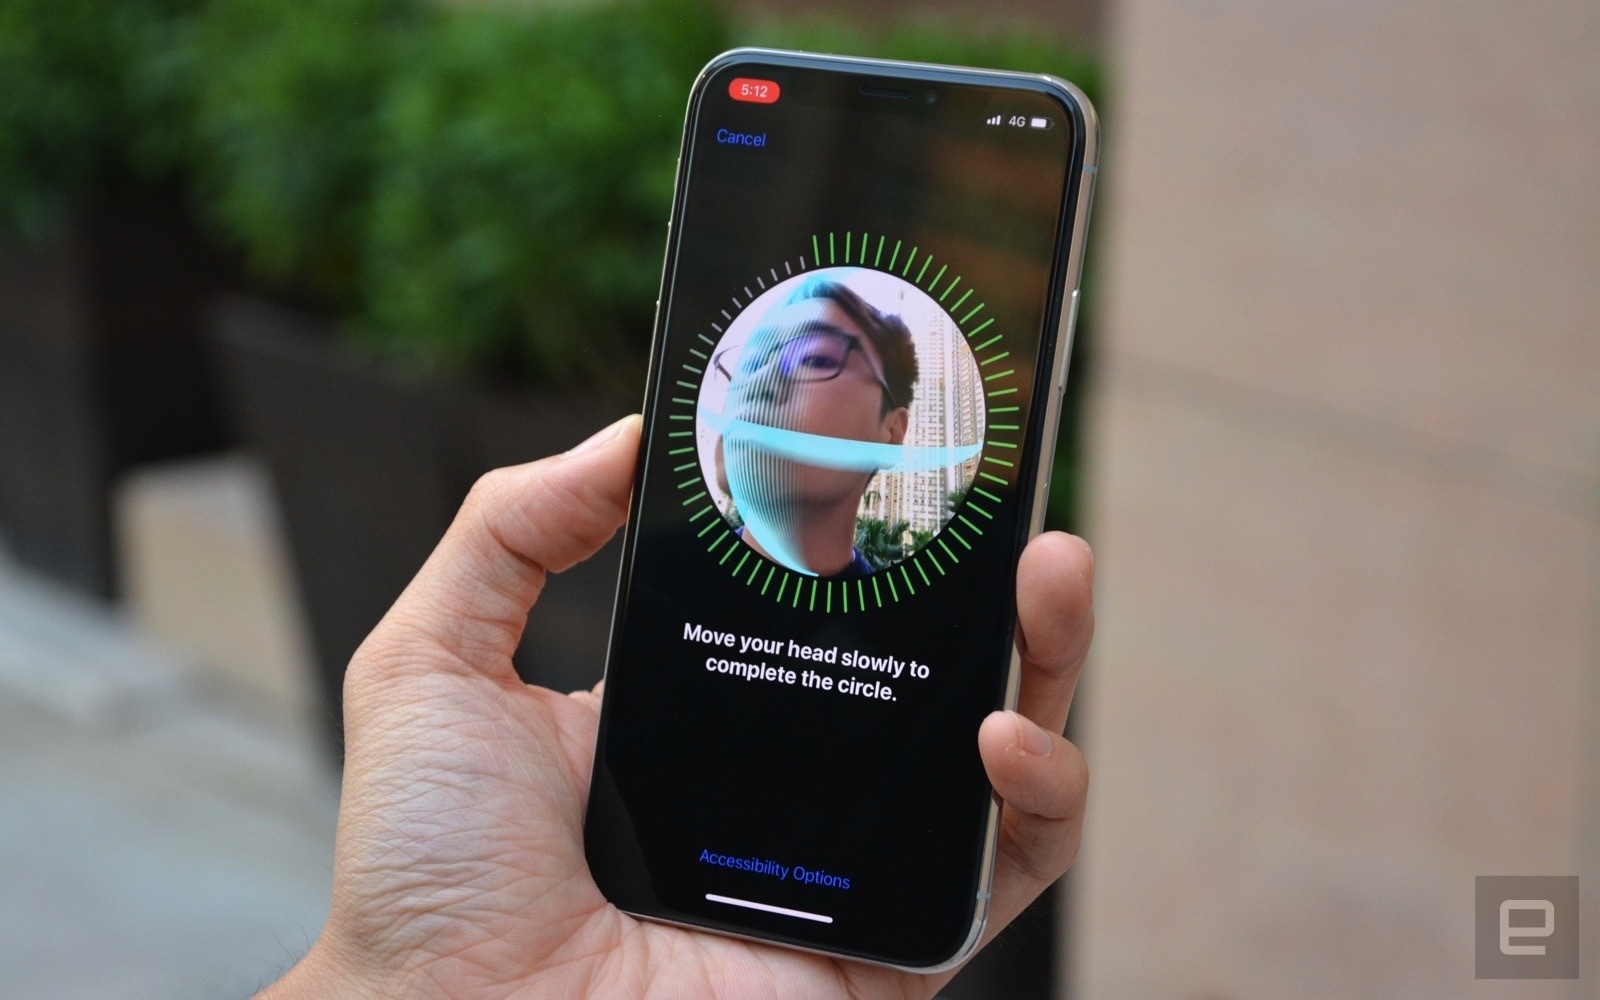 iPhone X owners can't use Face ID to approve family purchases | DeviceDaily.com